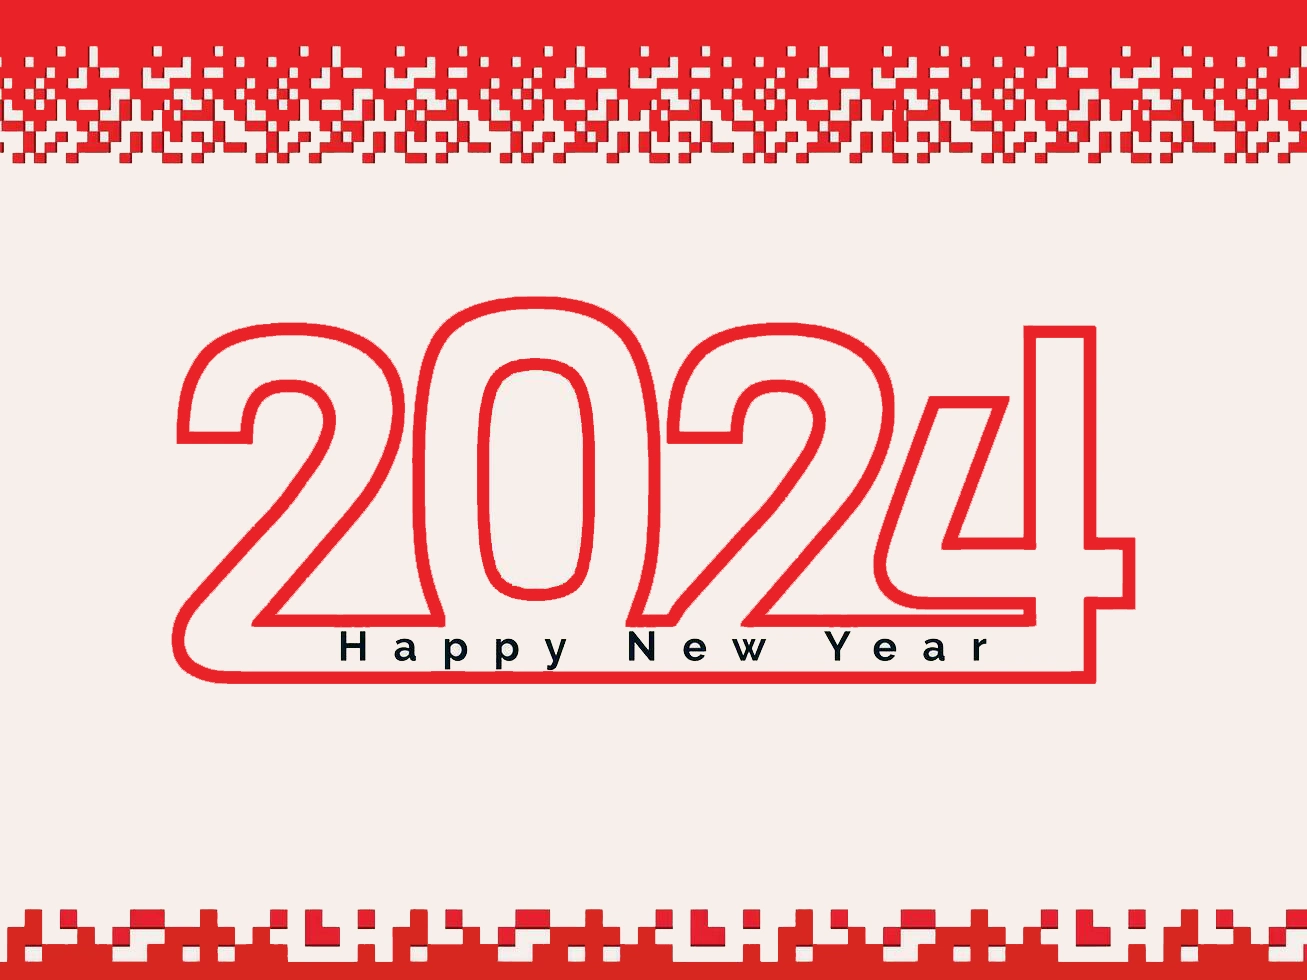 happy new year 2024 festive new year s background holiday greeting image